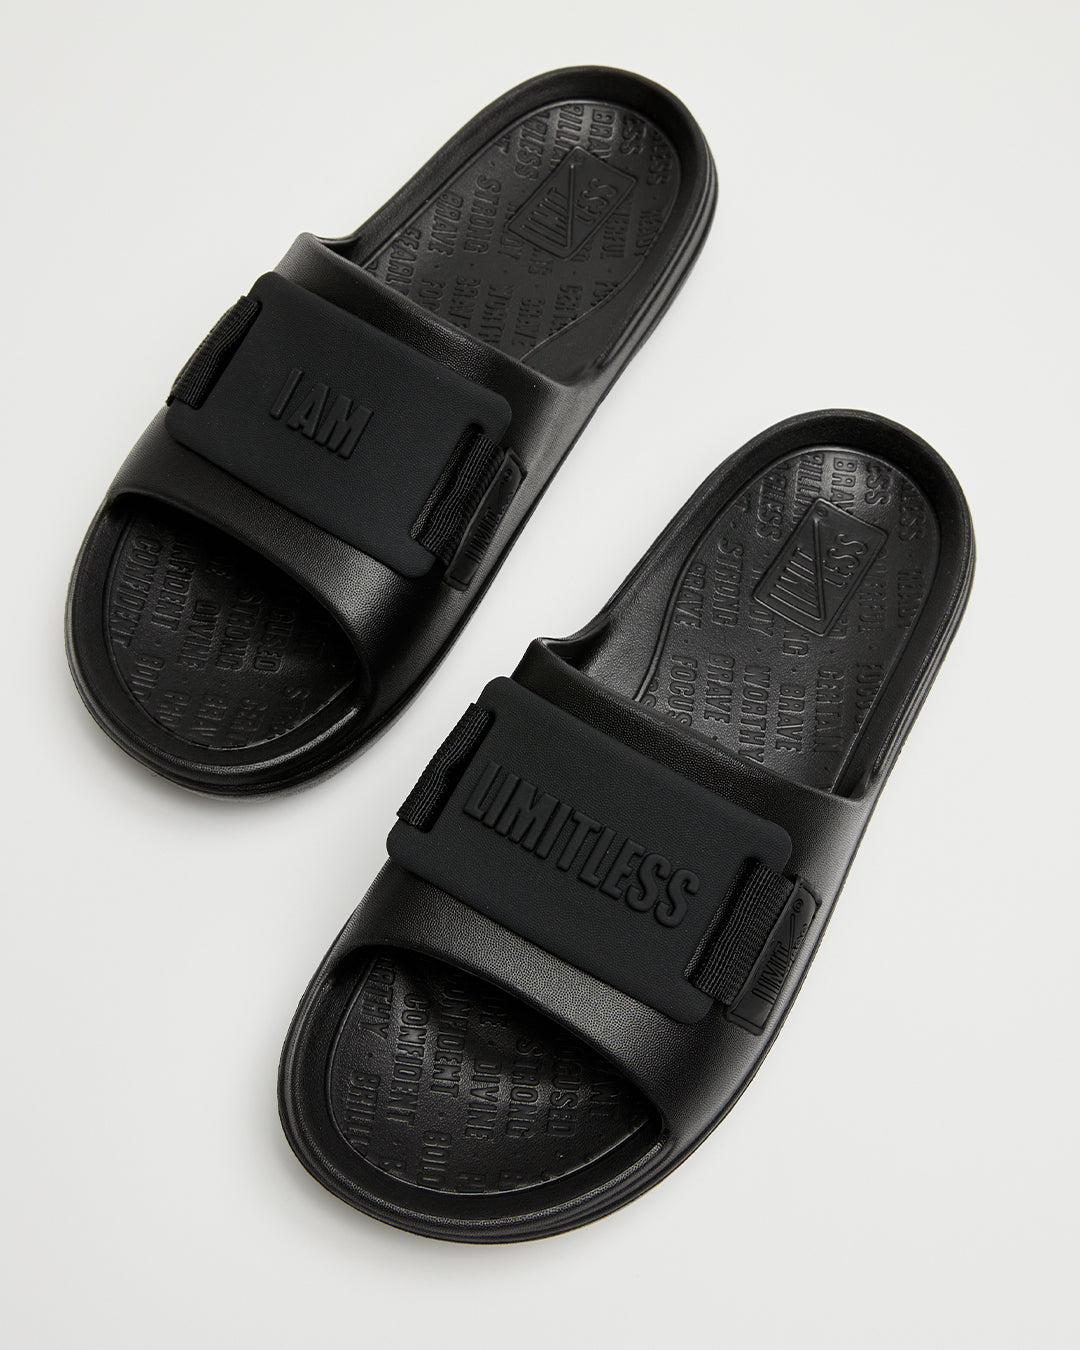 LIMITLESS SLIDES™ WITH ESSENTIAL TIBAH™ QUAD - CLEAR LAKE HIGH SCHOOL EDITION